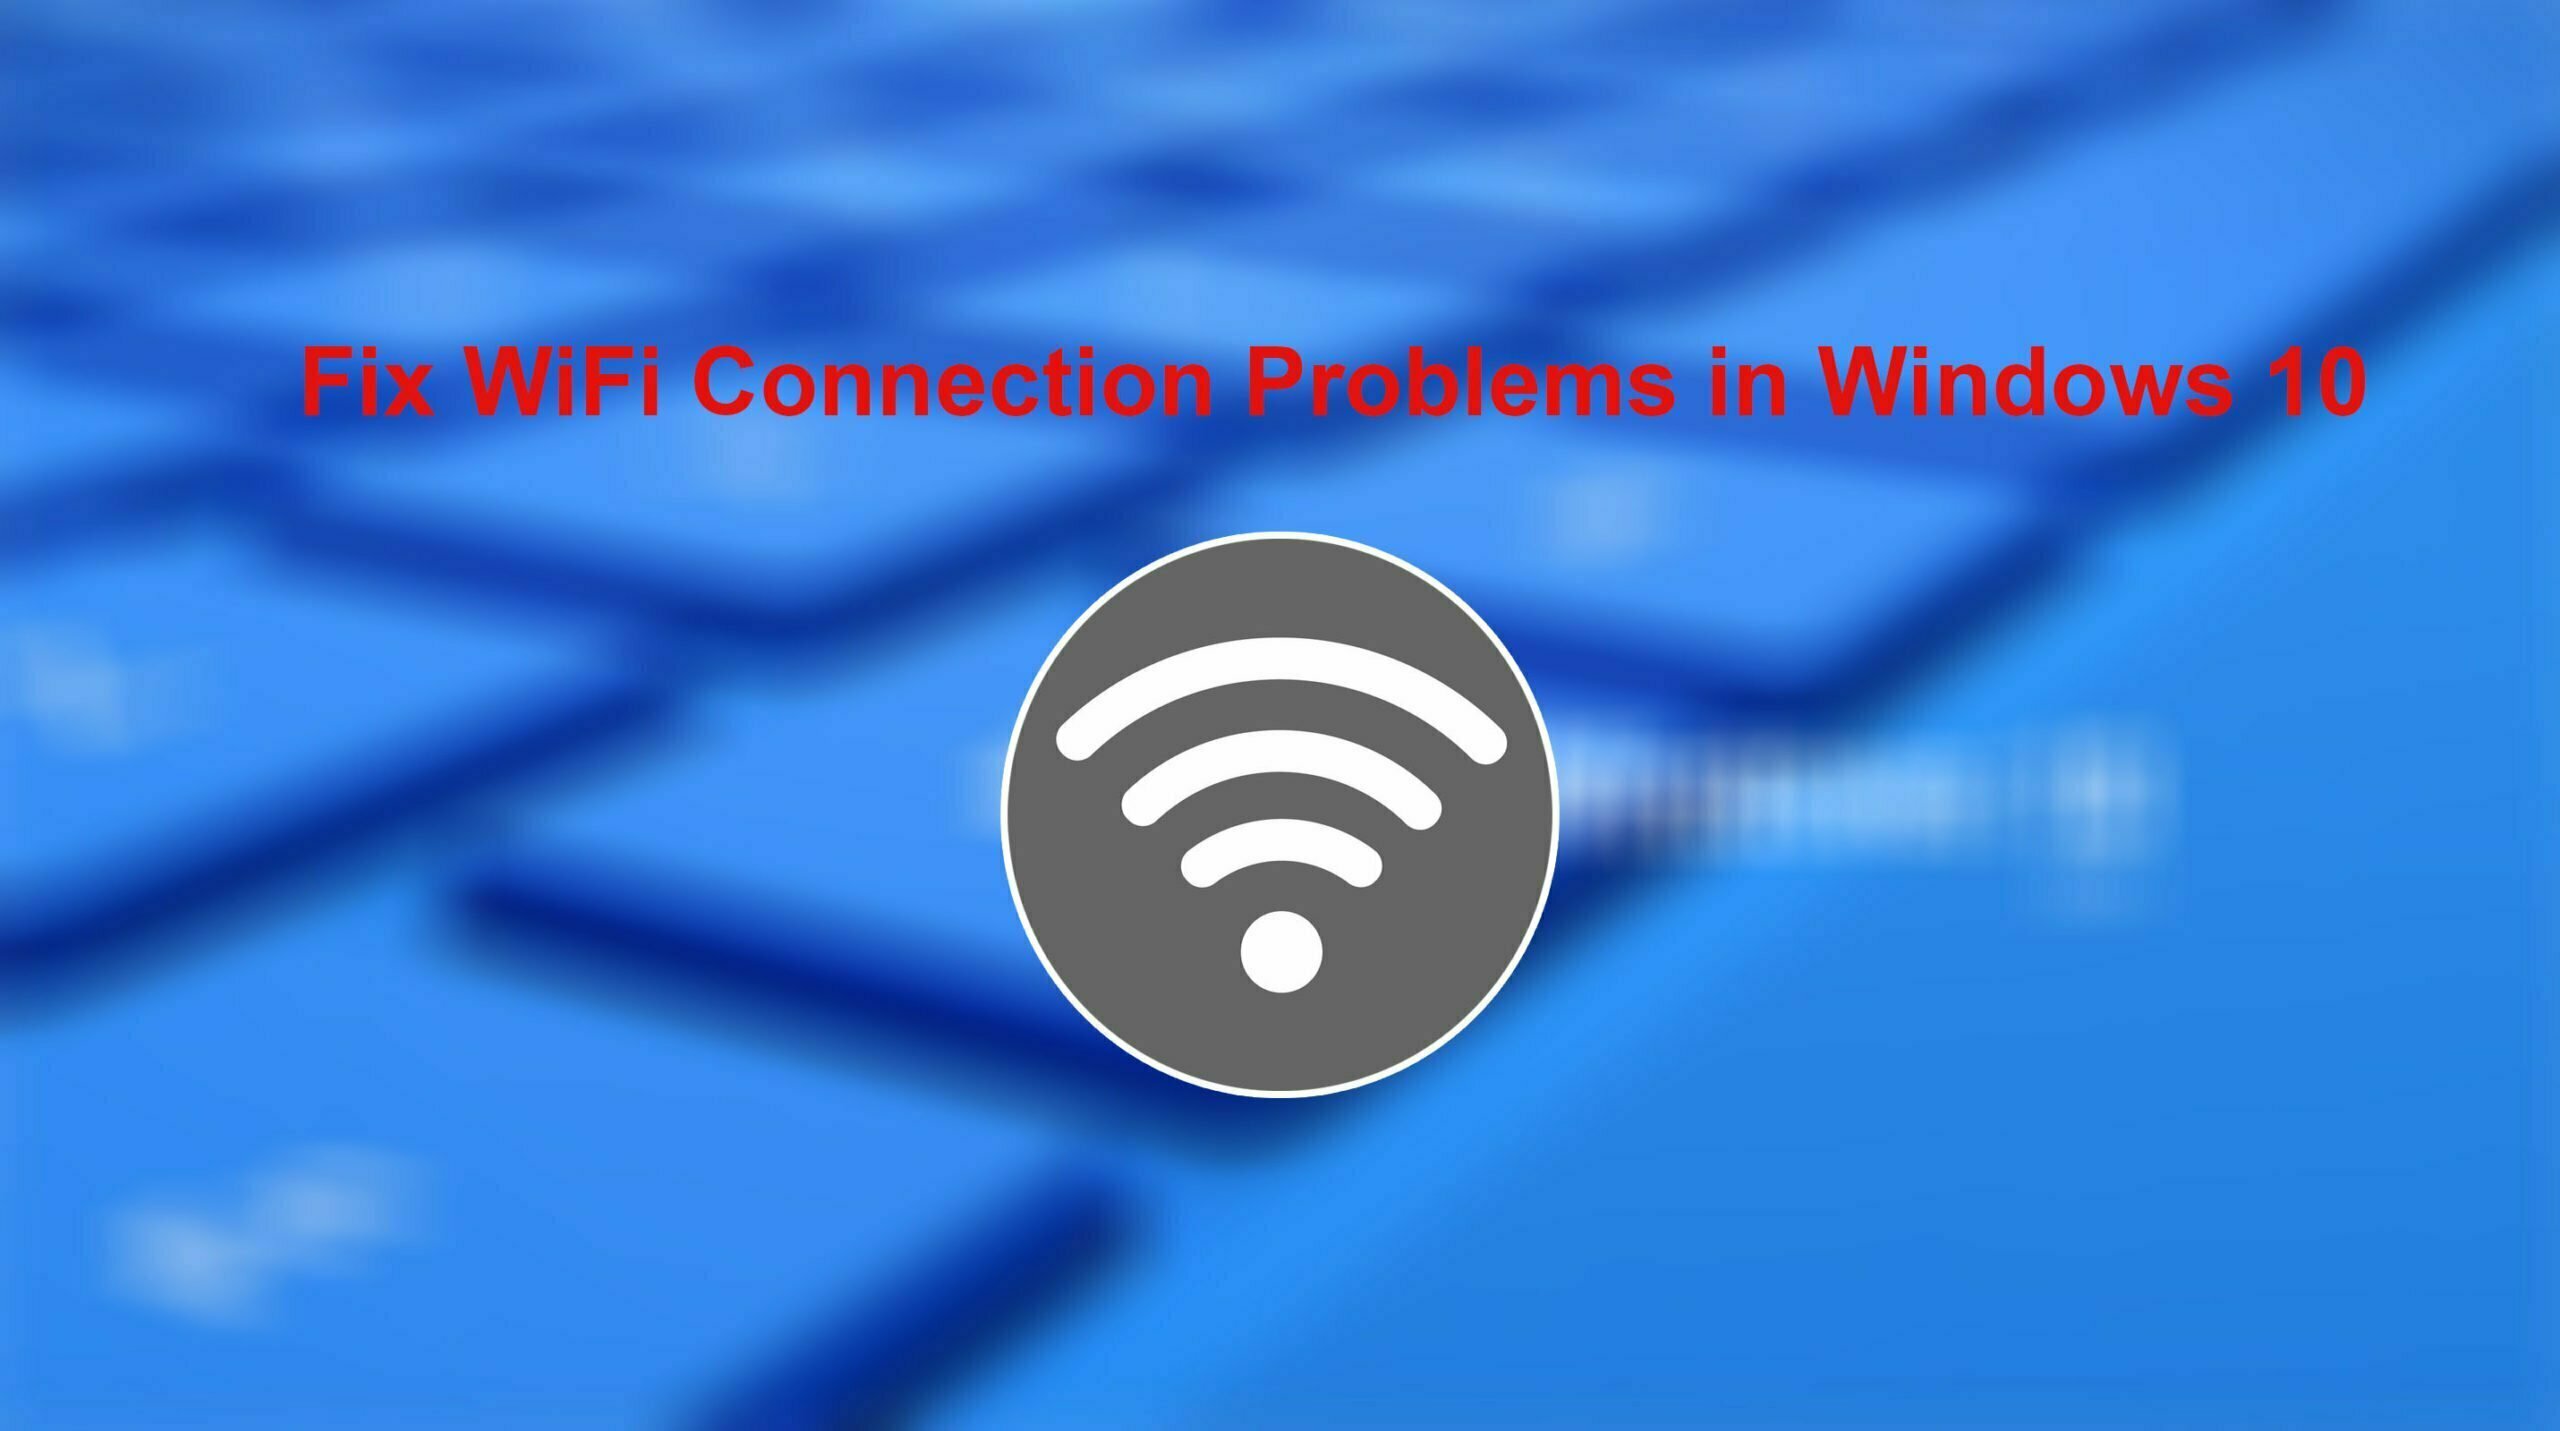 How to Fix WiFi Connection Problems in Windows 10 - 5 Methods